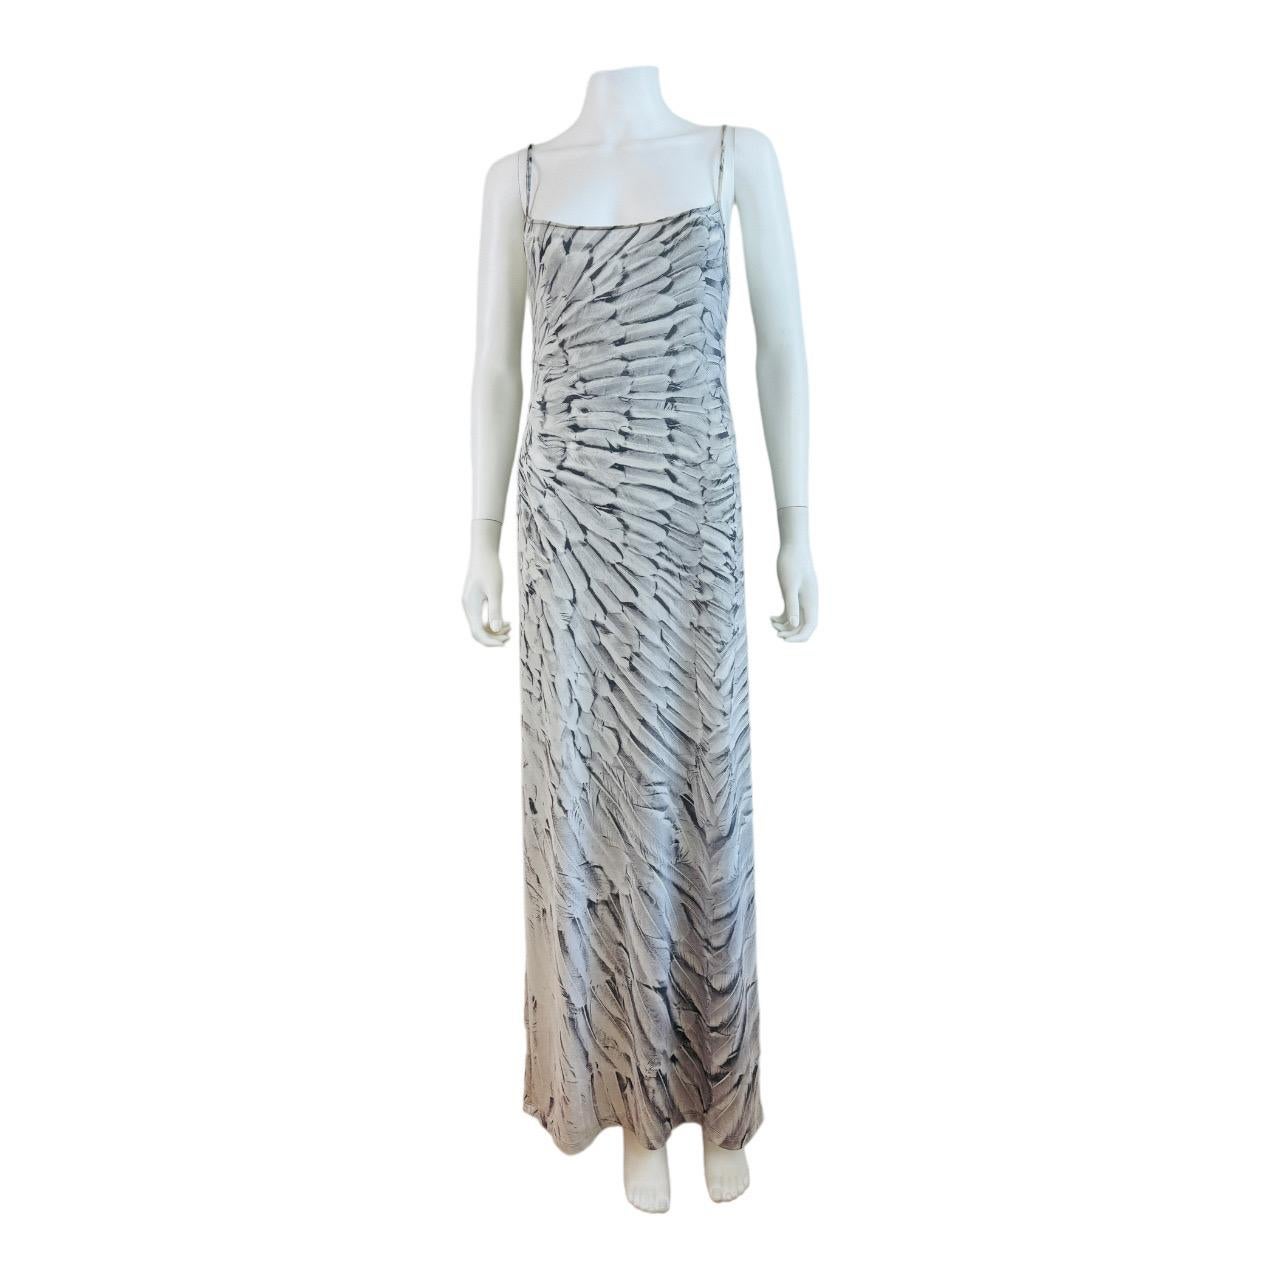 Vintage Late 90s Roberto Cavalli Dress
Polyester + elastin fabric
Grey feather print
Low cut scooped neckline
Thin shoulder straps
Wiggle bodycon fit
Long maxi length
Build in mesh bra
Slips on overhead
Unlined

Marked S, fit like a S-M,